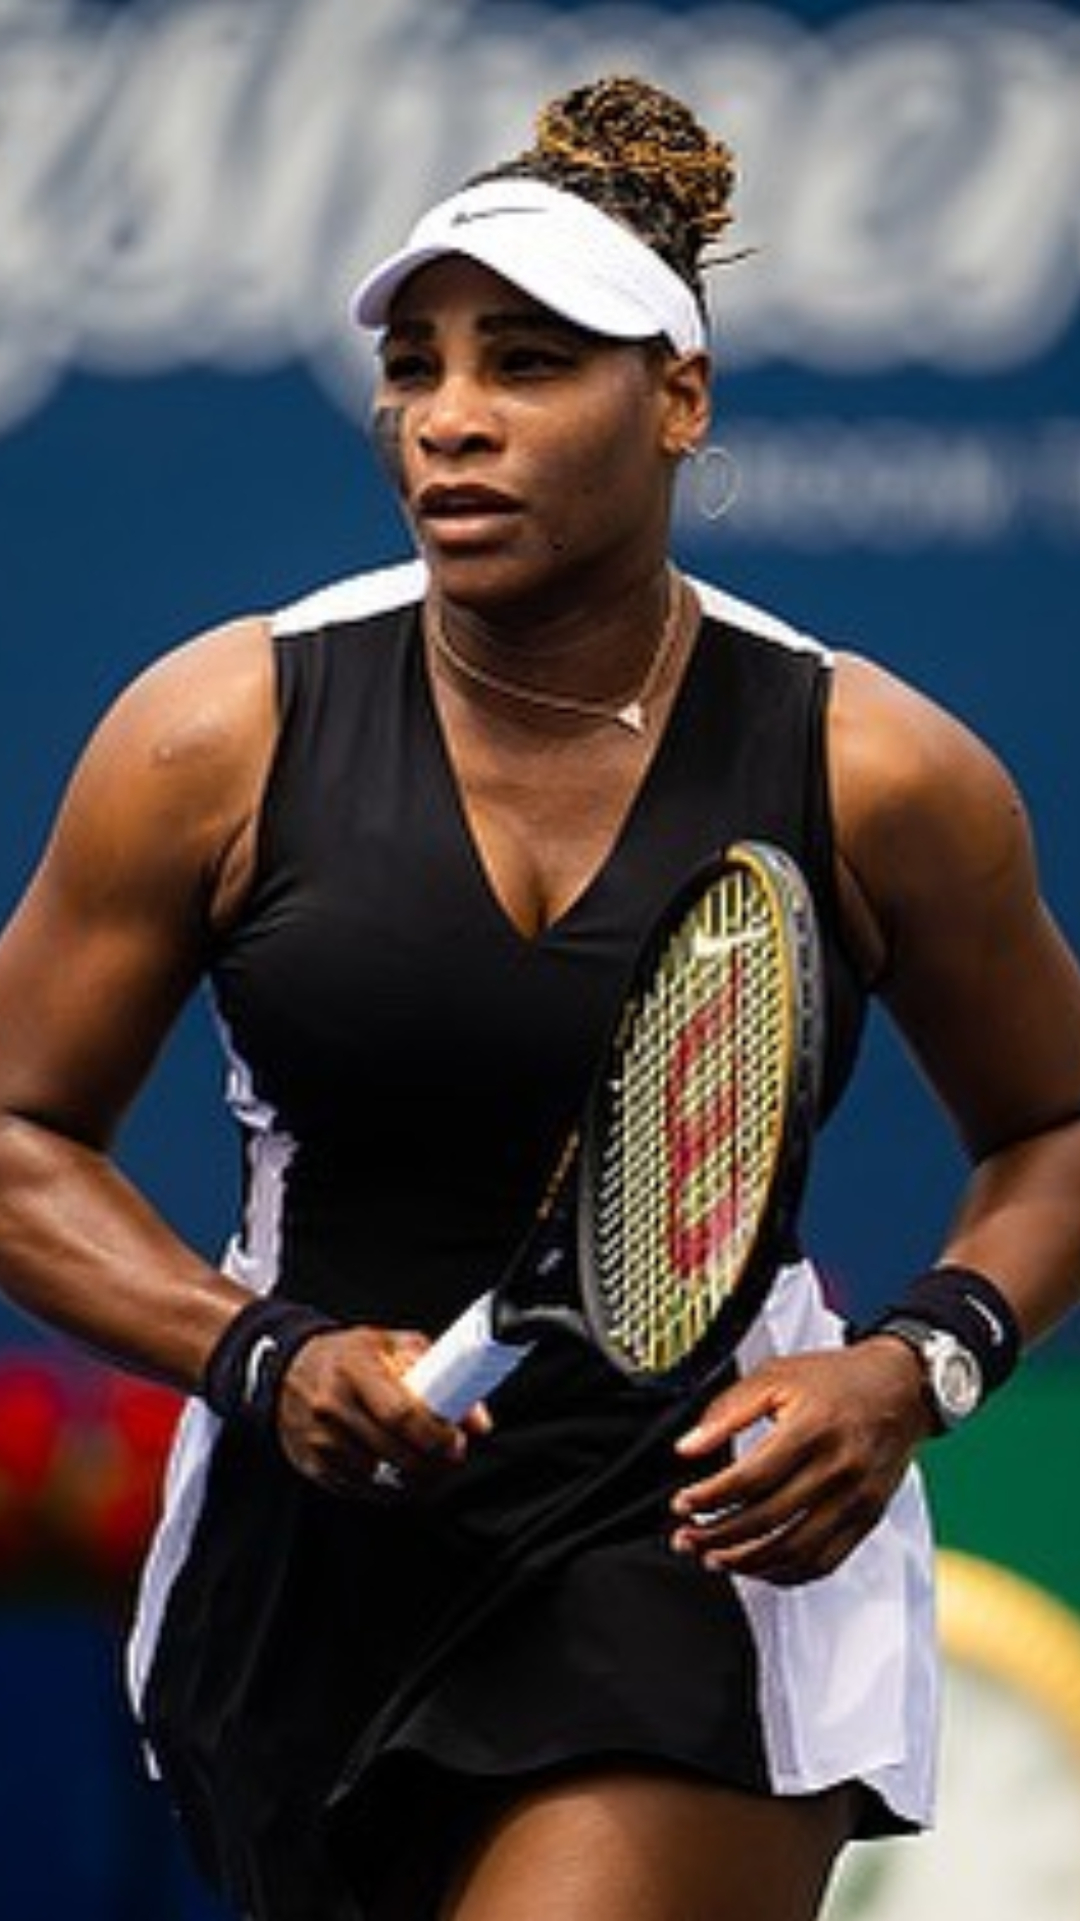 US Open: Here's list of top 5 female tennis players with most titles